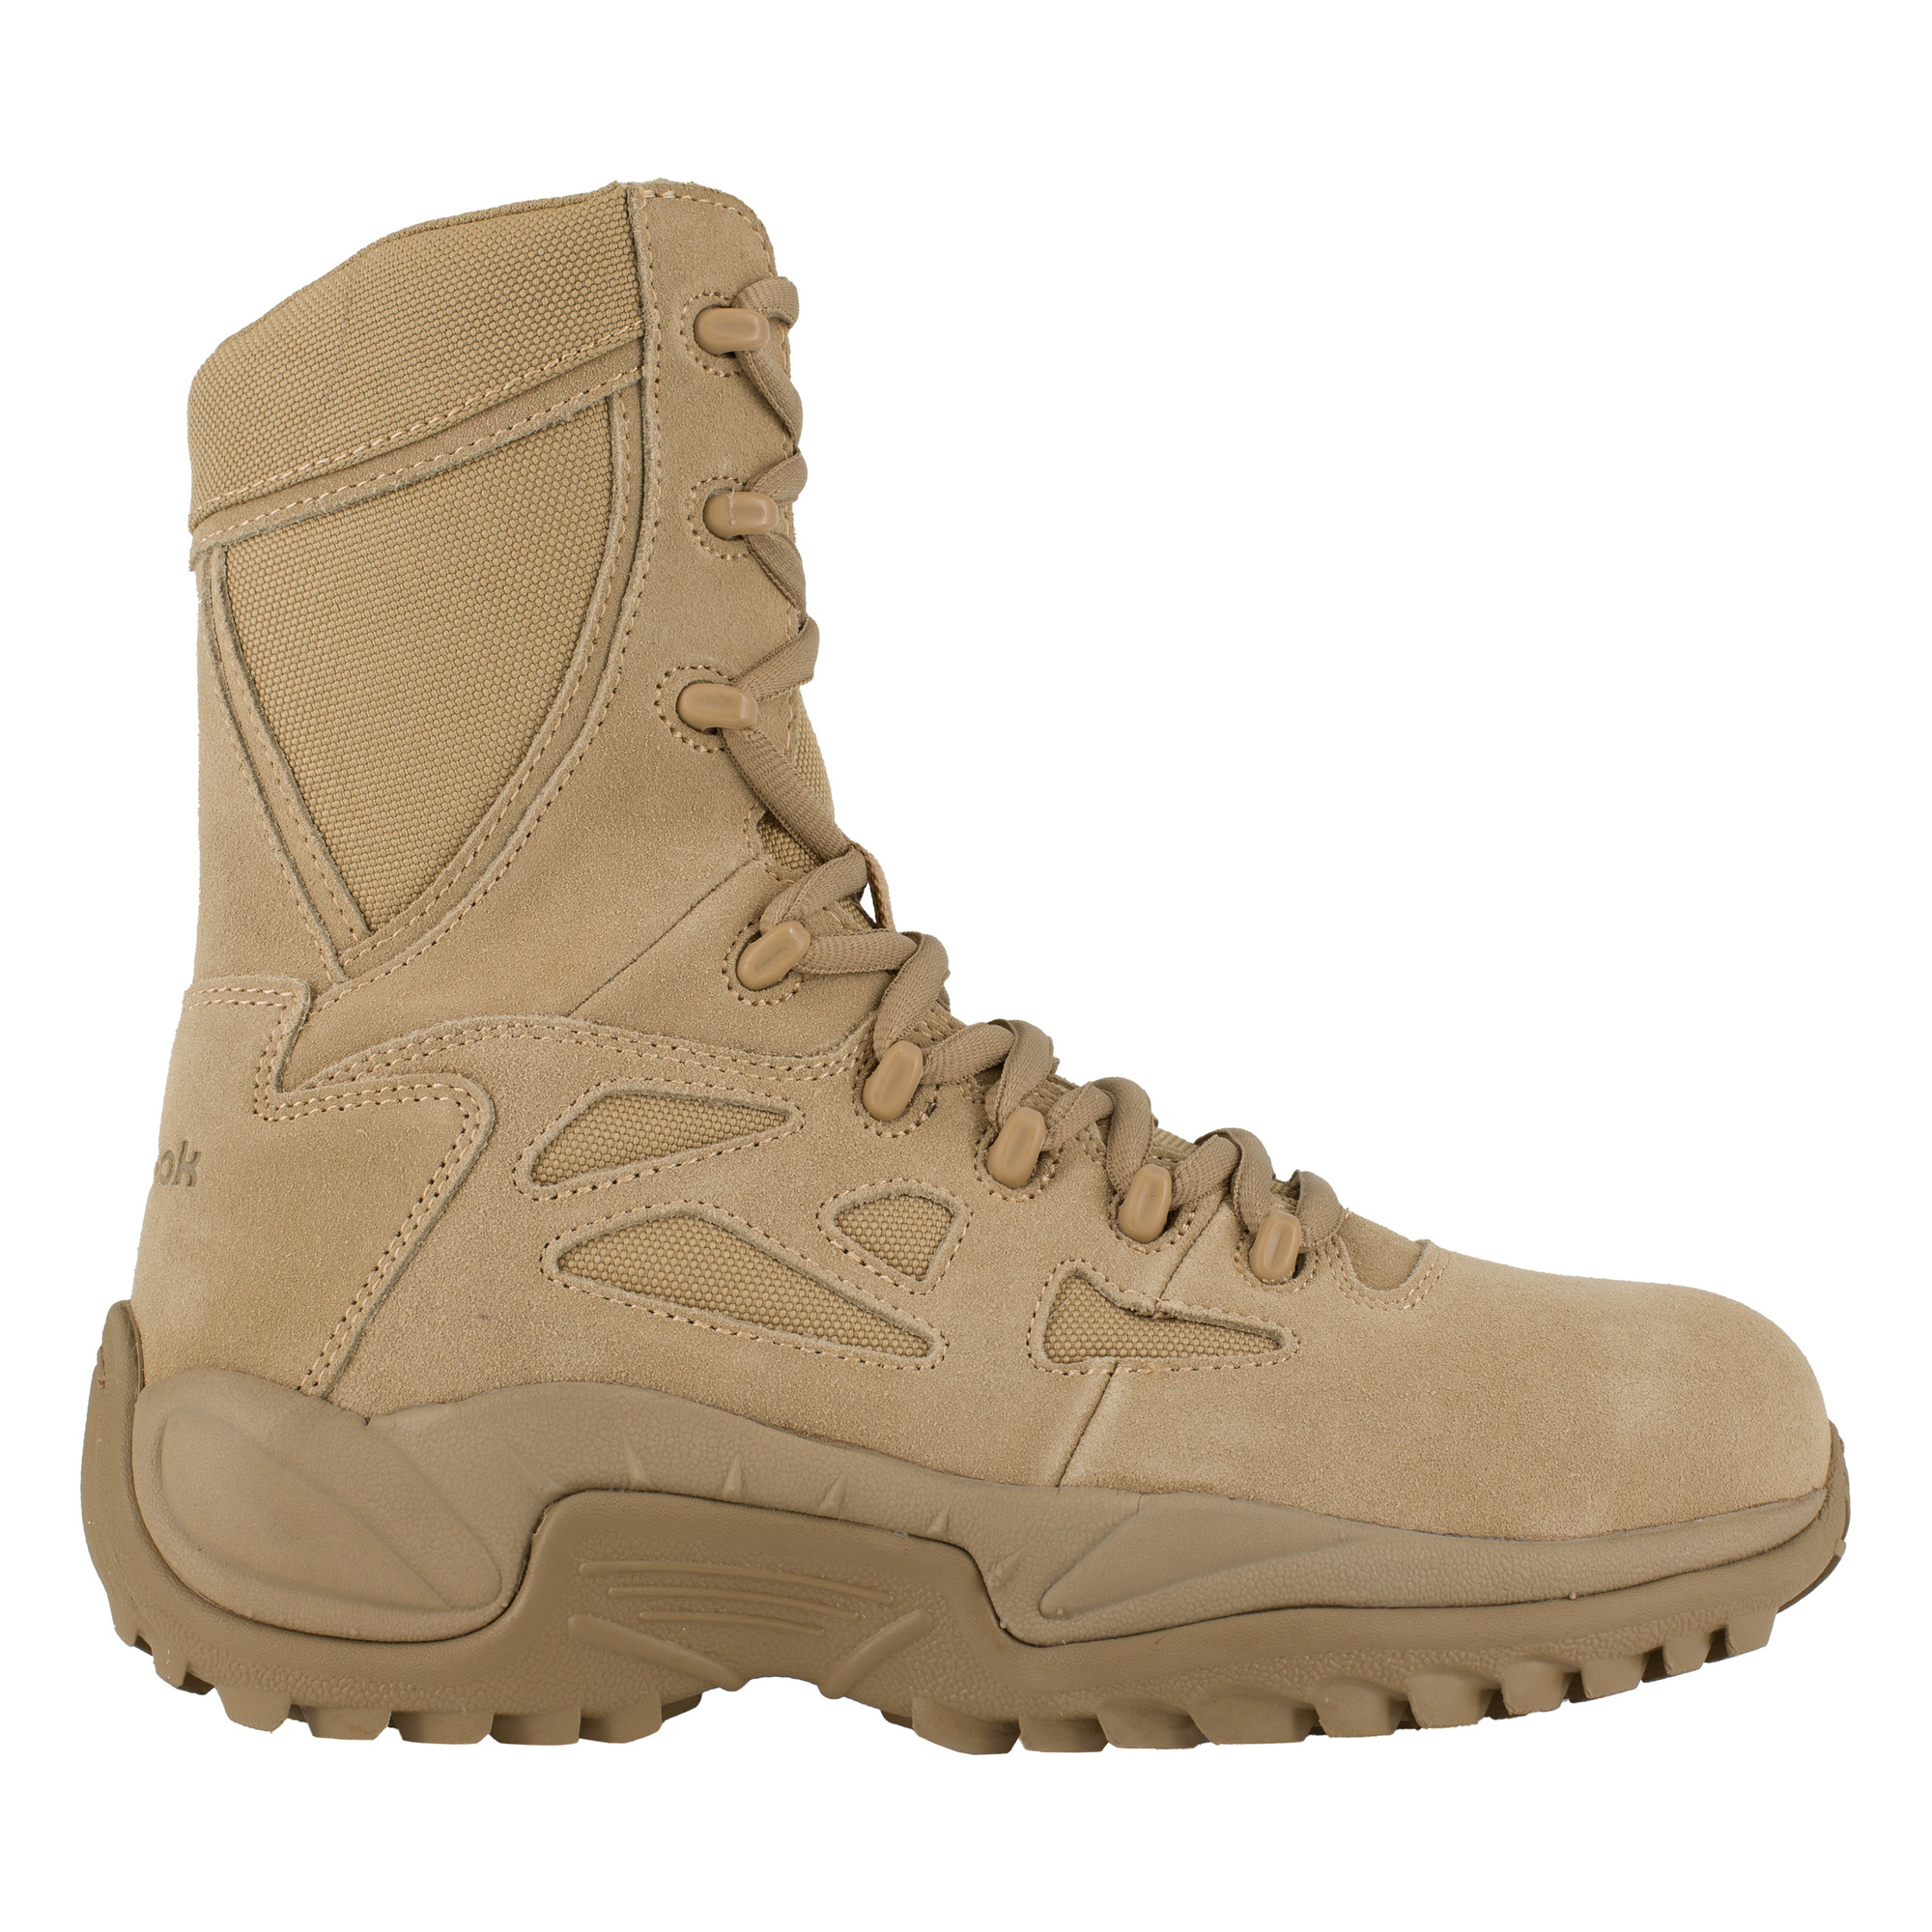 Reebok, 8Inch Stealth Tactical Boot with Side Zipper, Size 10, Width Wide, Color Desert Tan, Model RB894